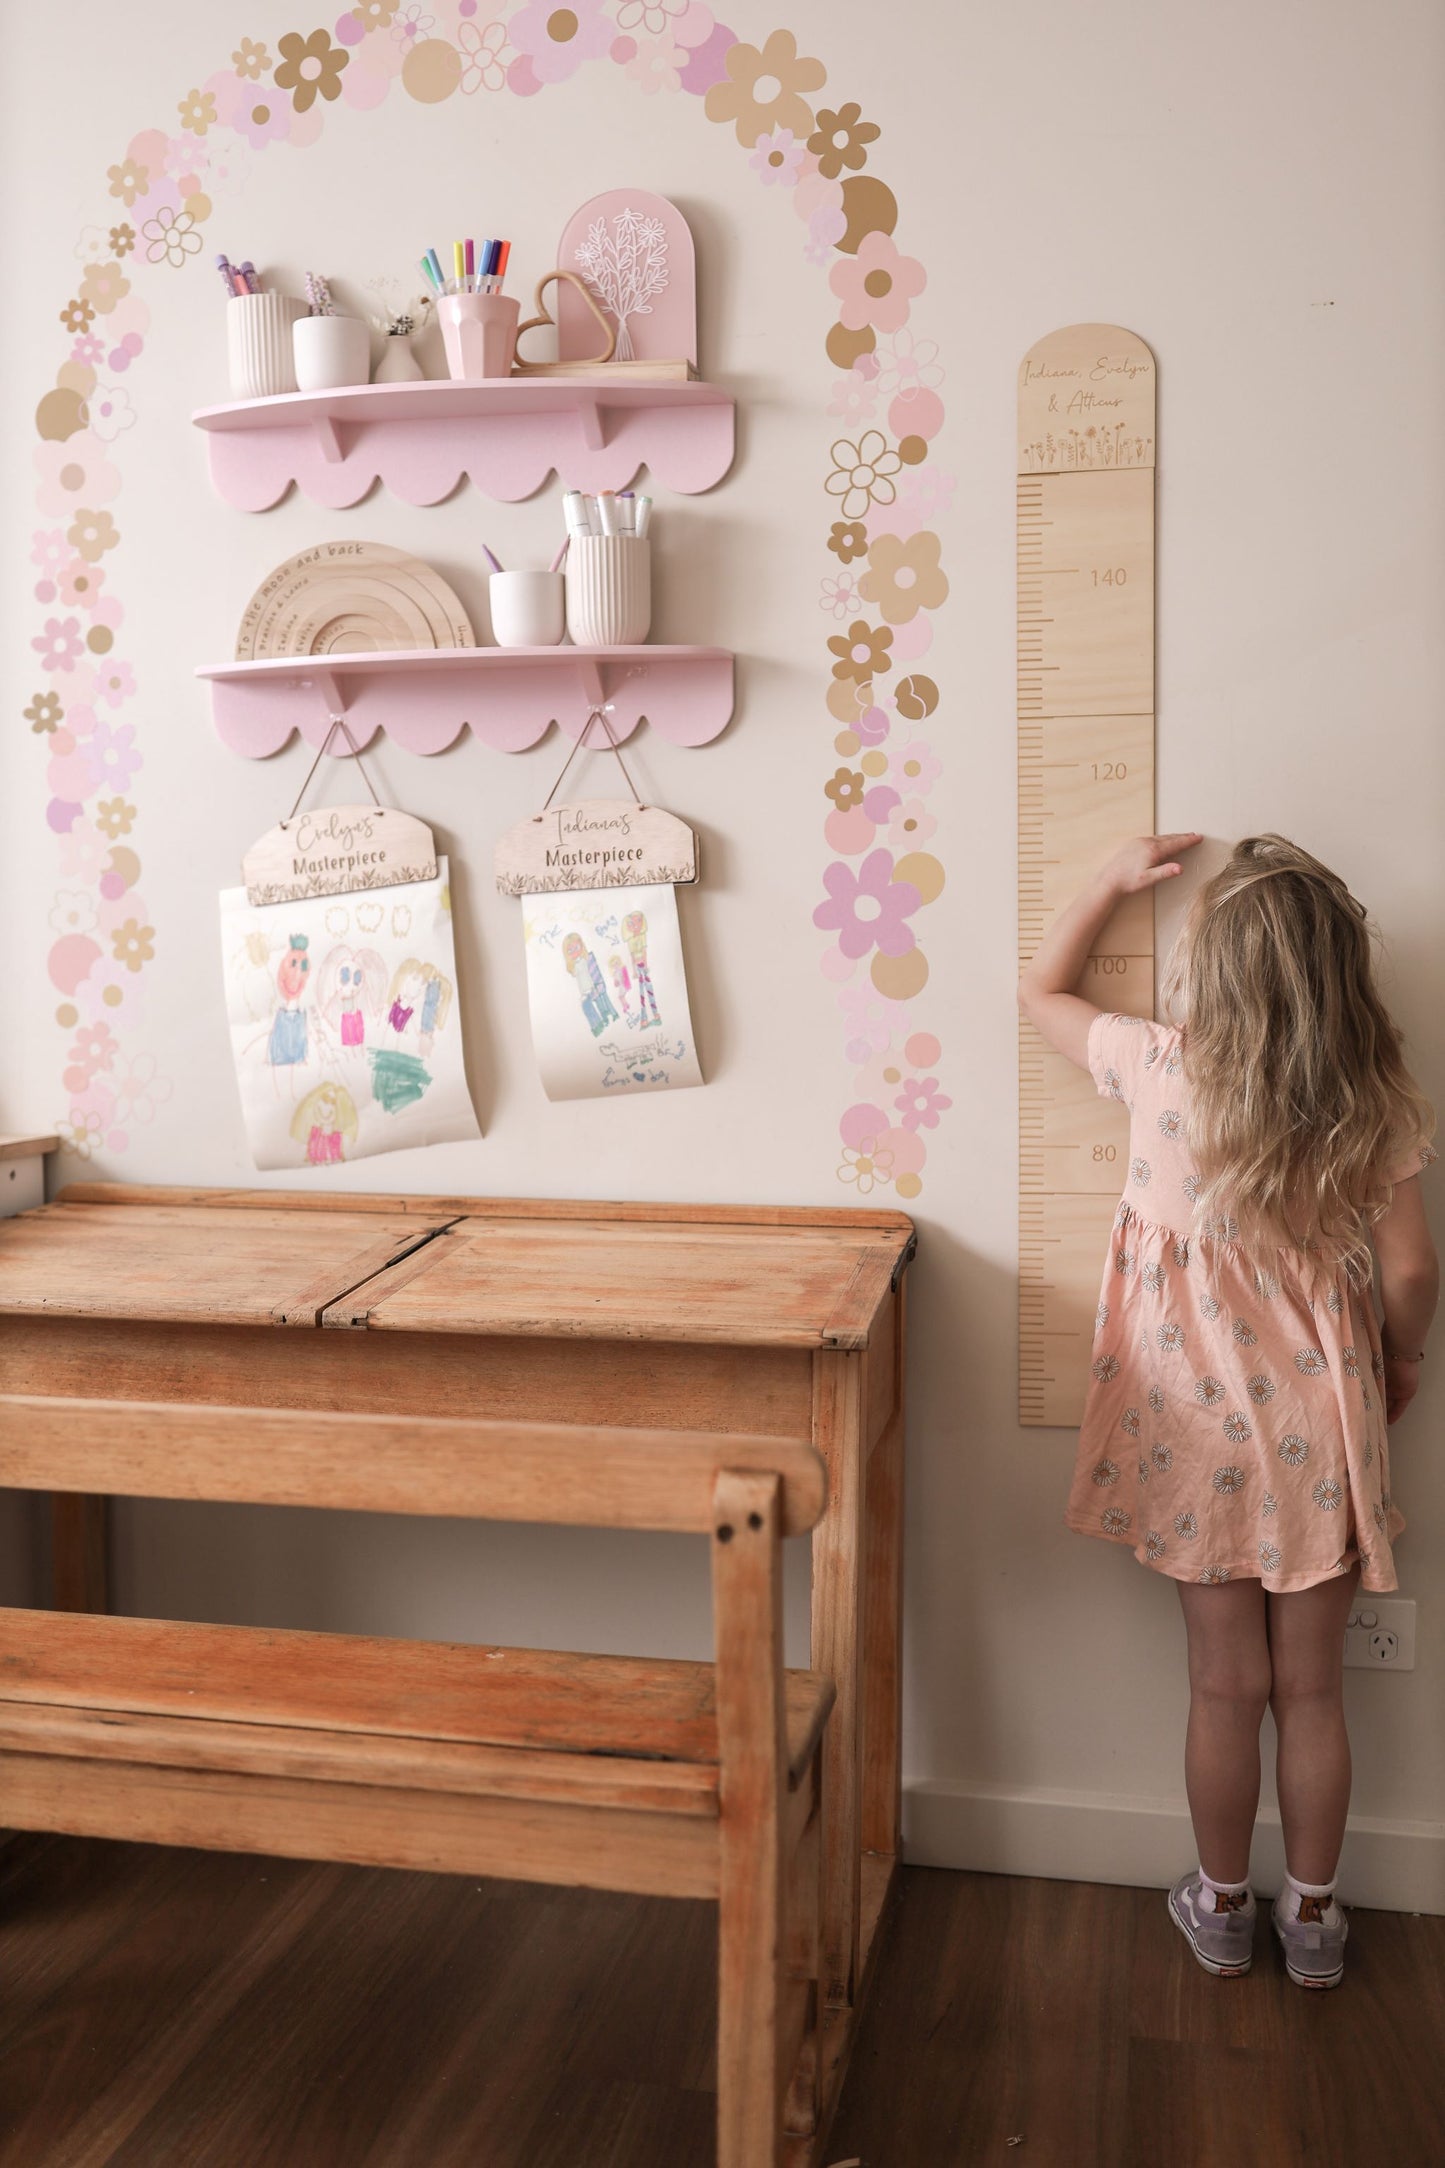 Growth chart - flowers - individual names